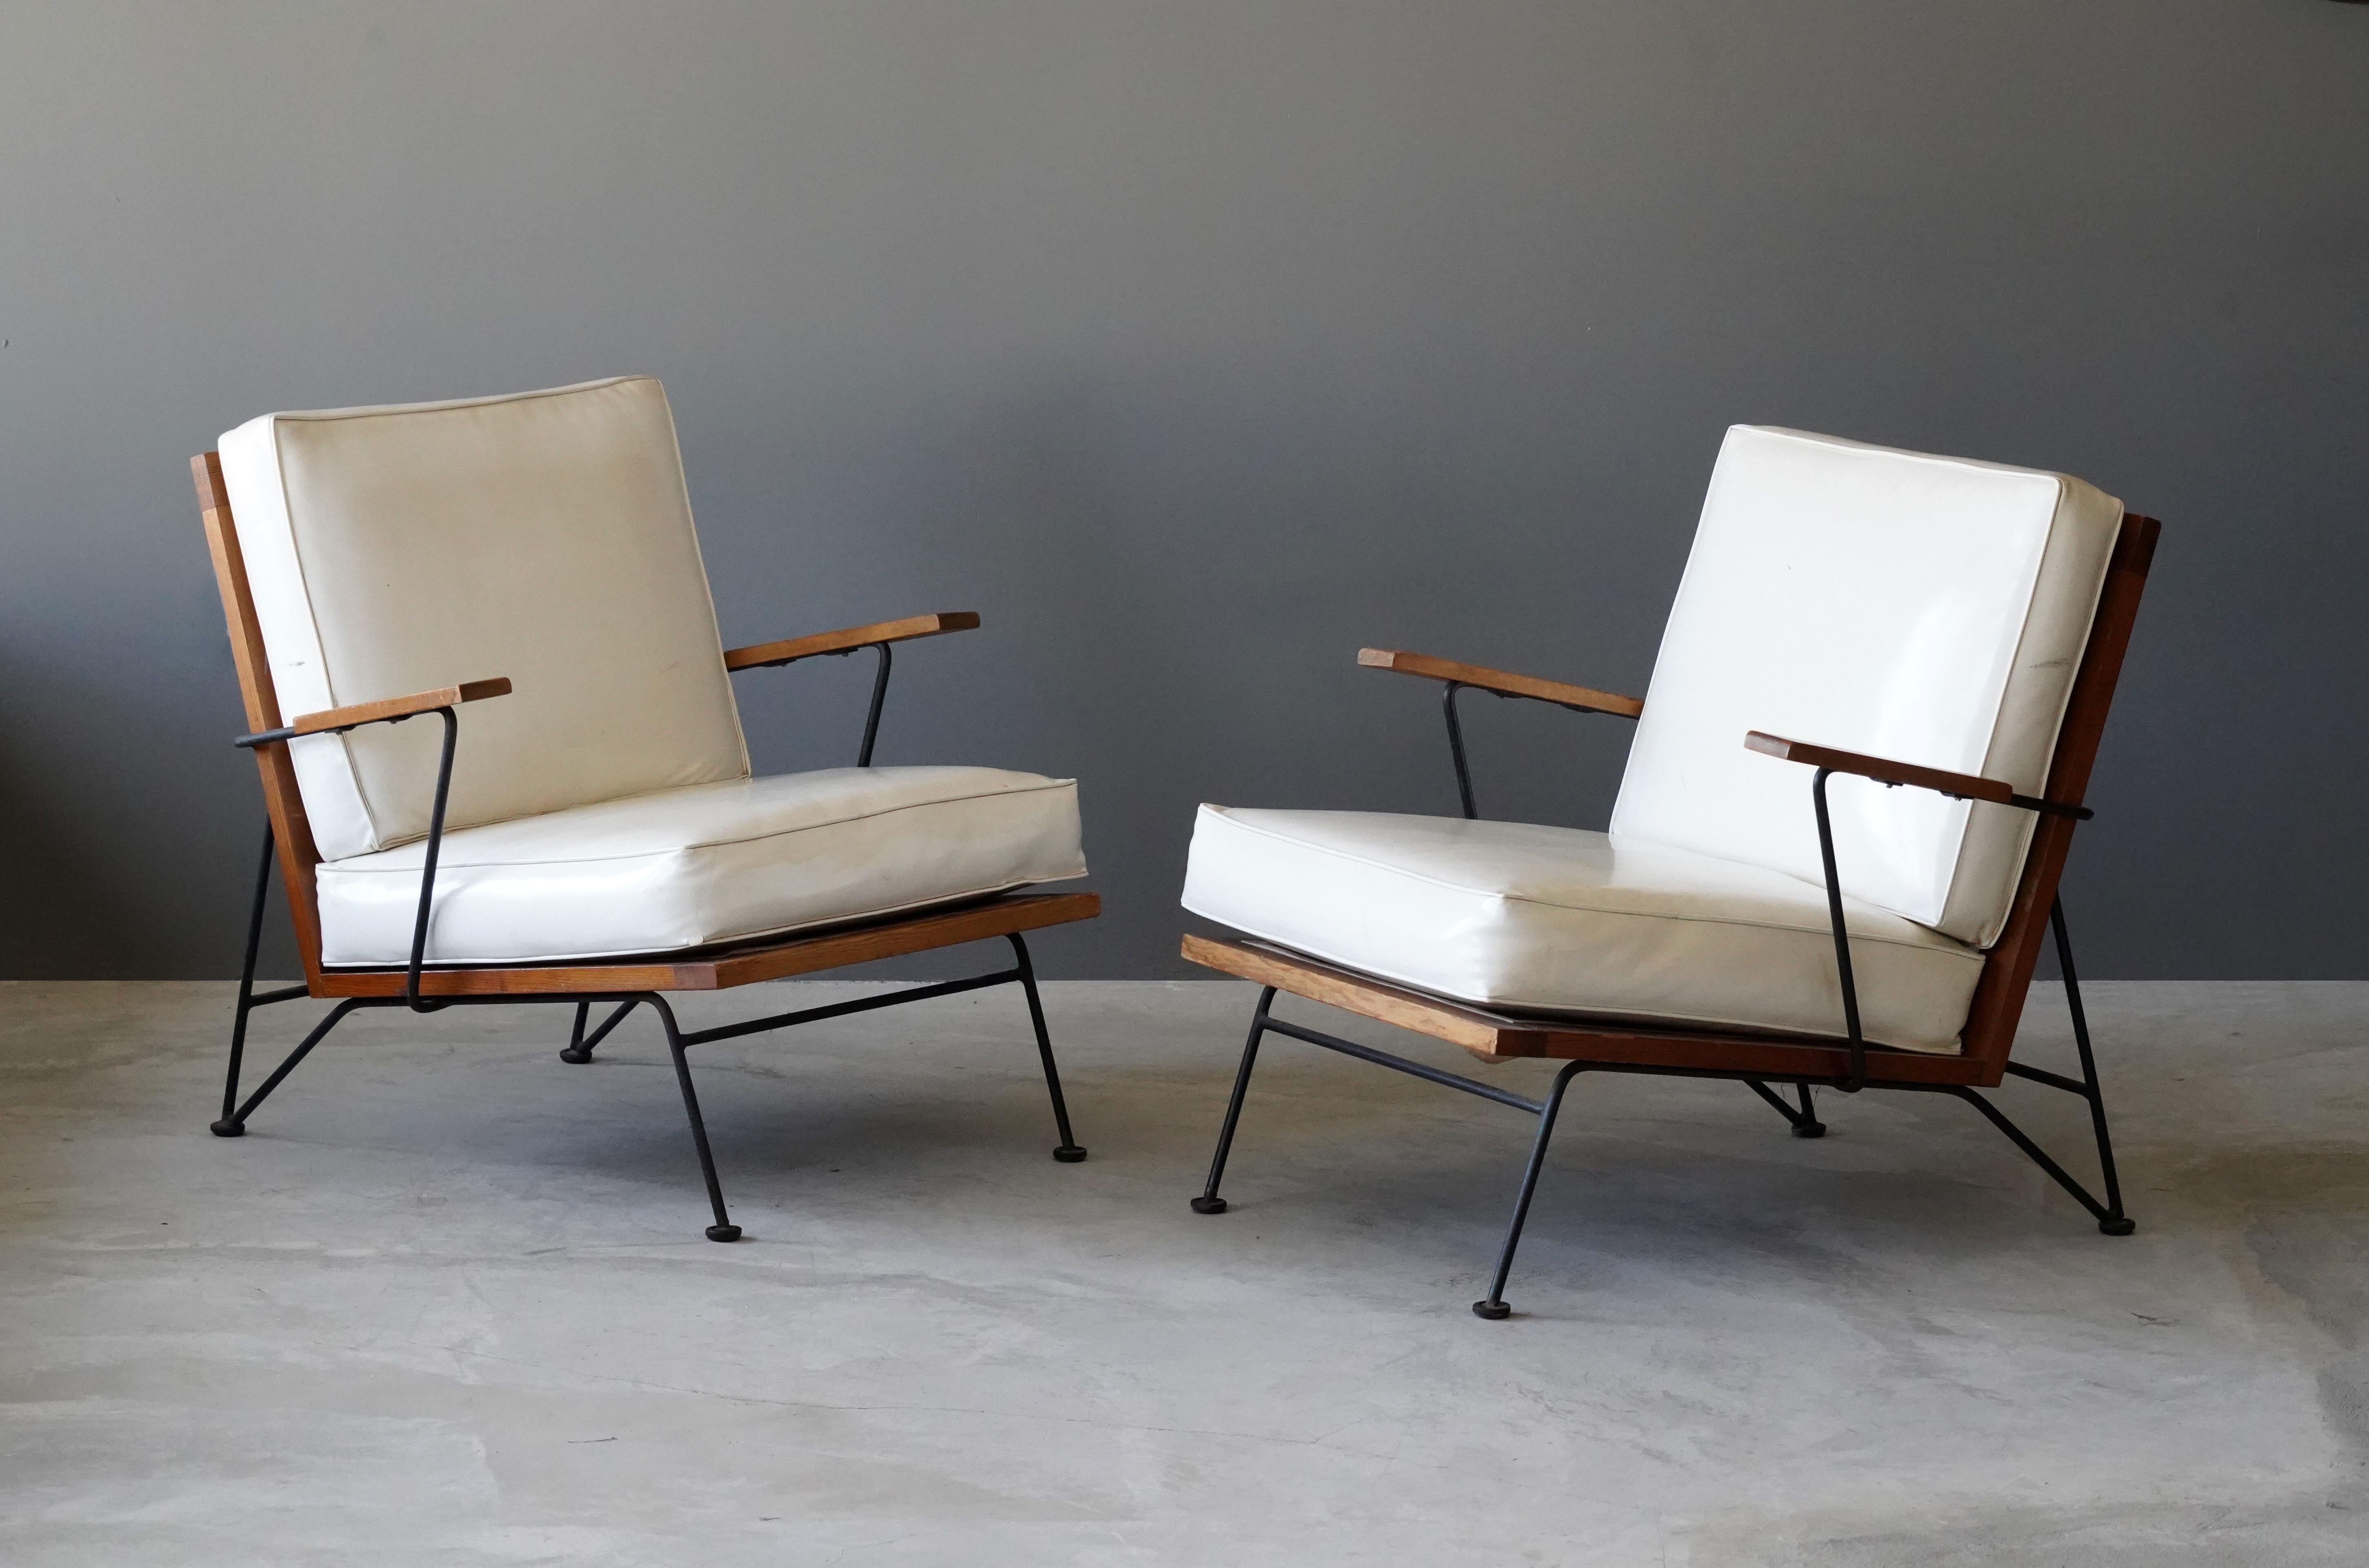 A pair of lounge chairs designed by husband and wife duo Pipsan Saarinen Swanson & J. Robert F. Swanson. Designed by their firm Swanson and Associates as part of the “Sol-Air” line for Ficks Reed Company, Cincinnati in 1949. 

The line was